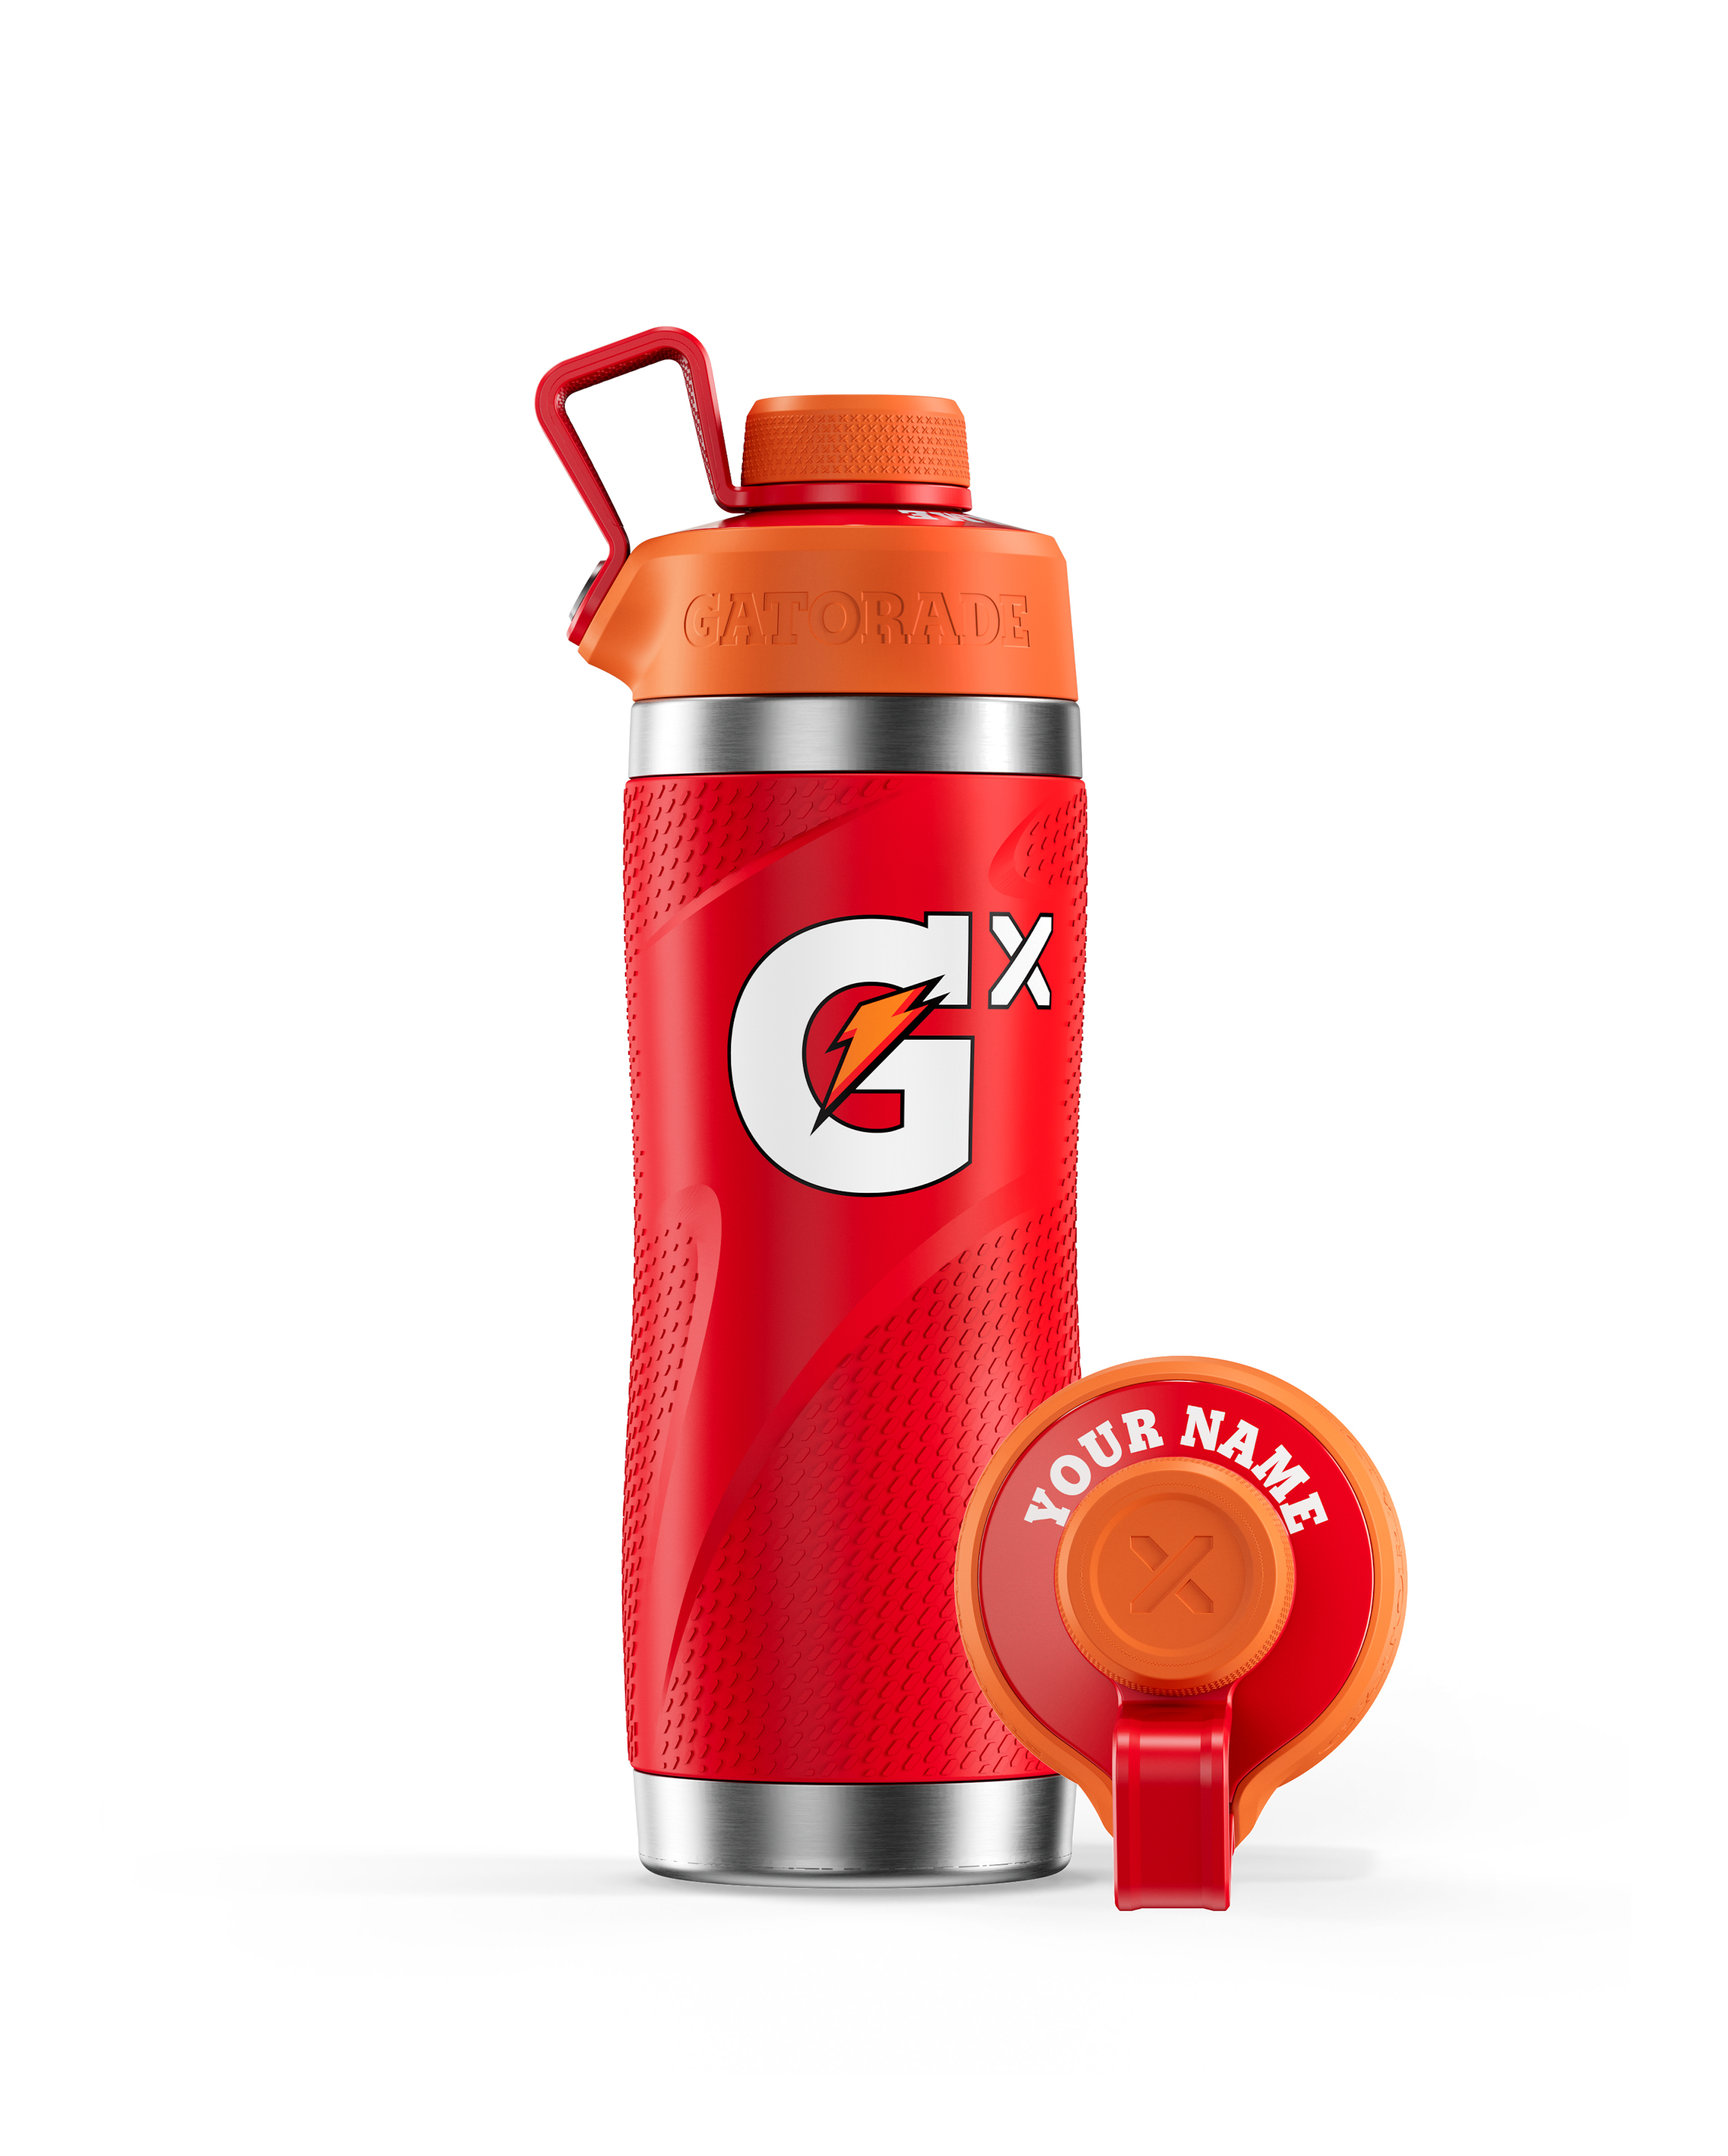 Gx Stainless Steel Red Bottle with Lid